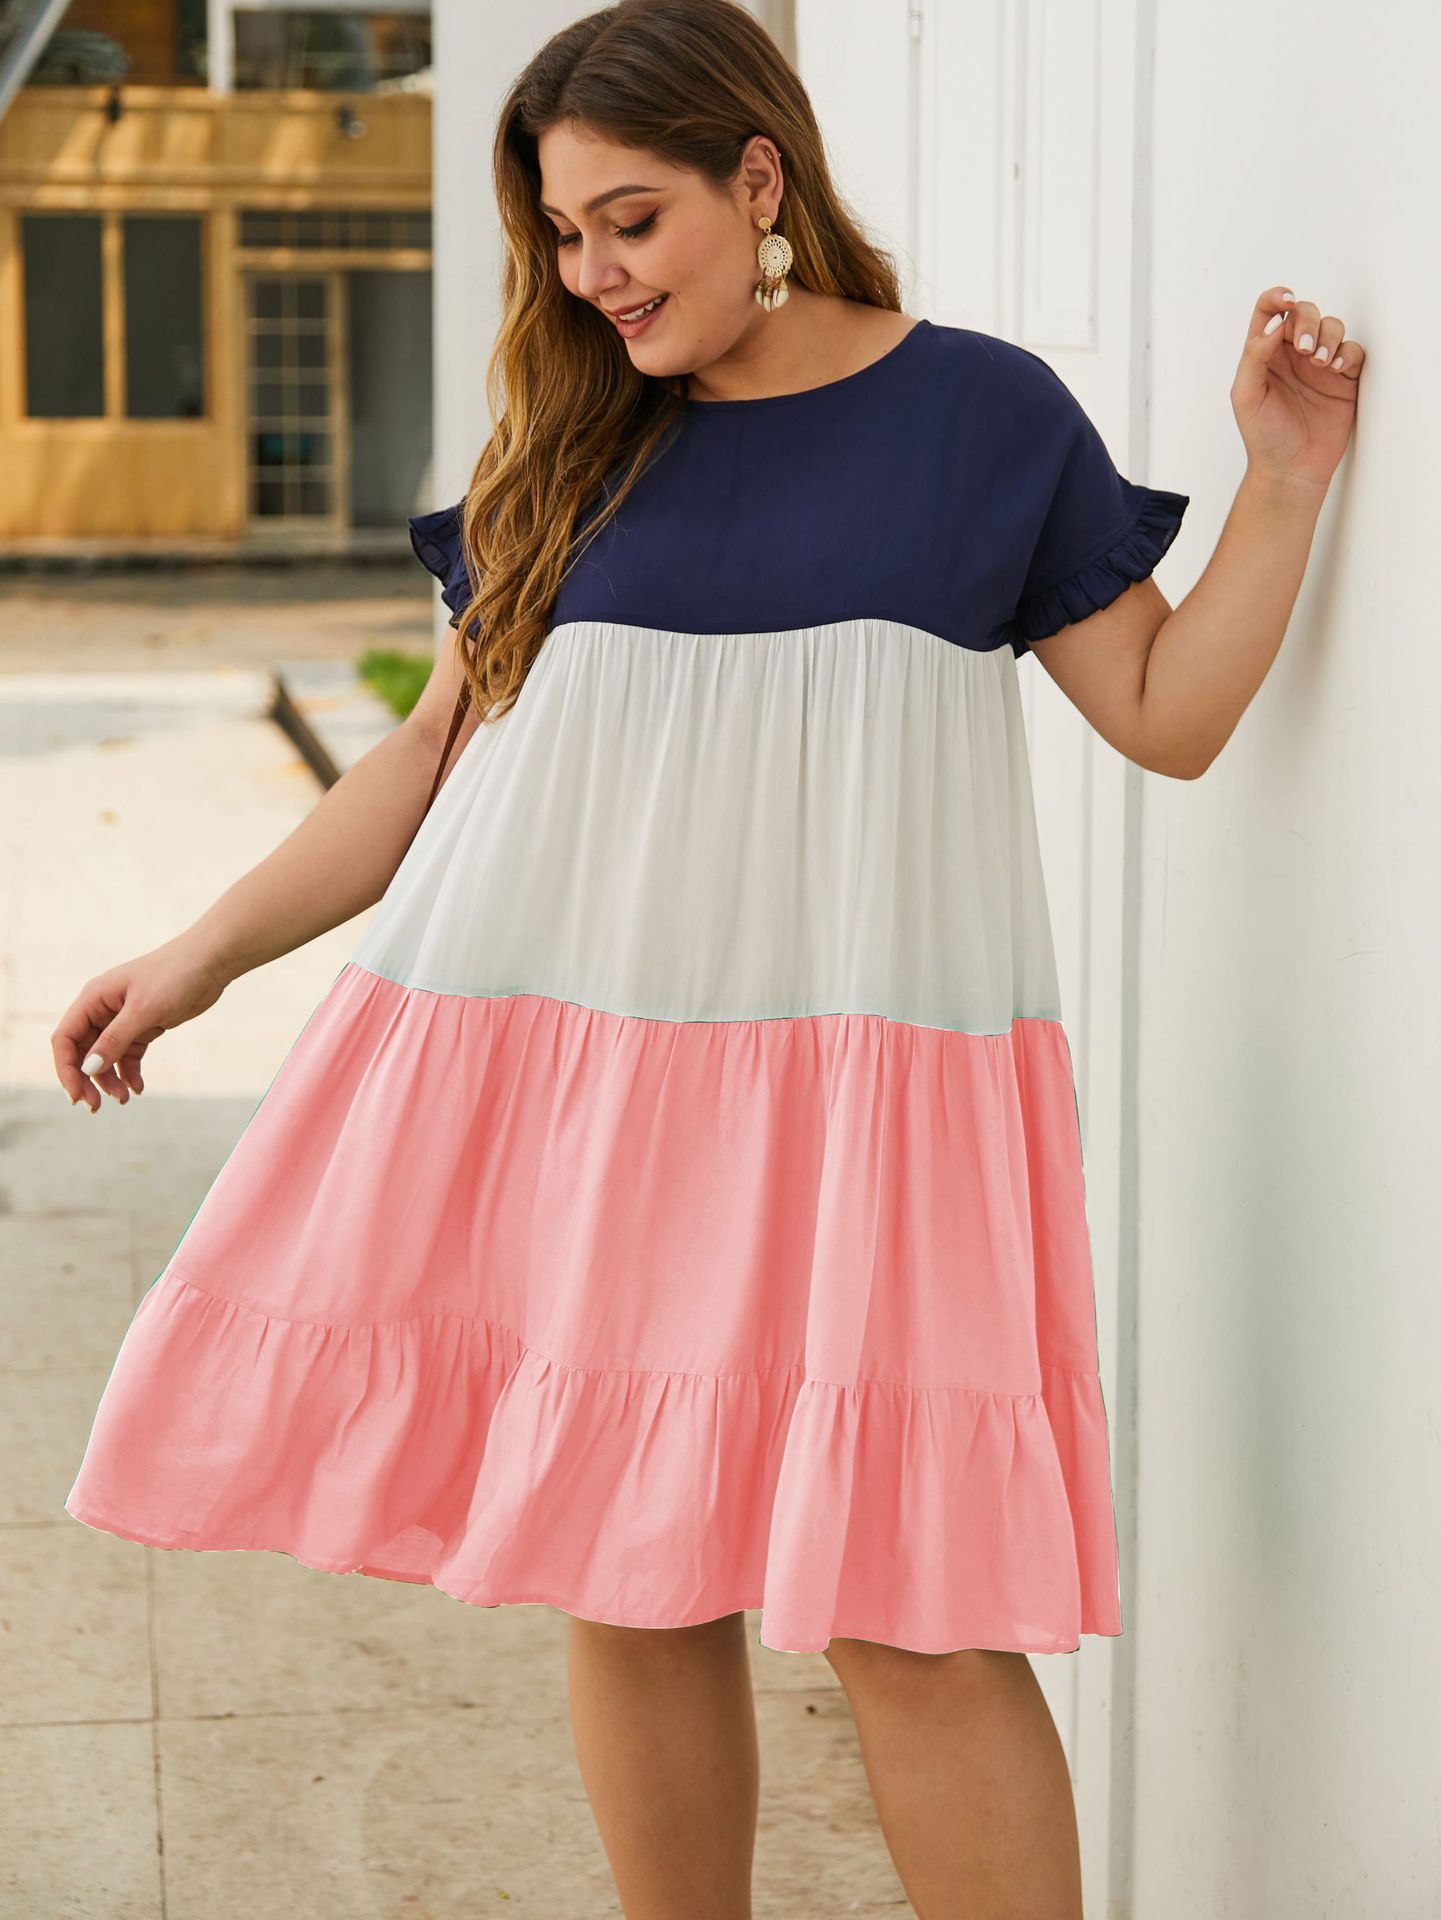 Tricolor Skater Dress - Ready to Wear